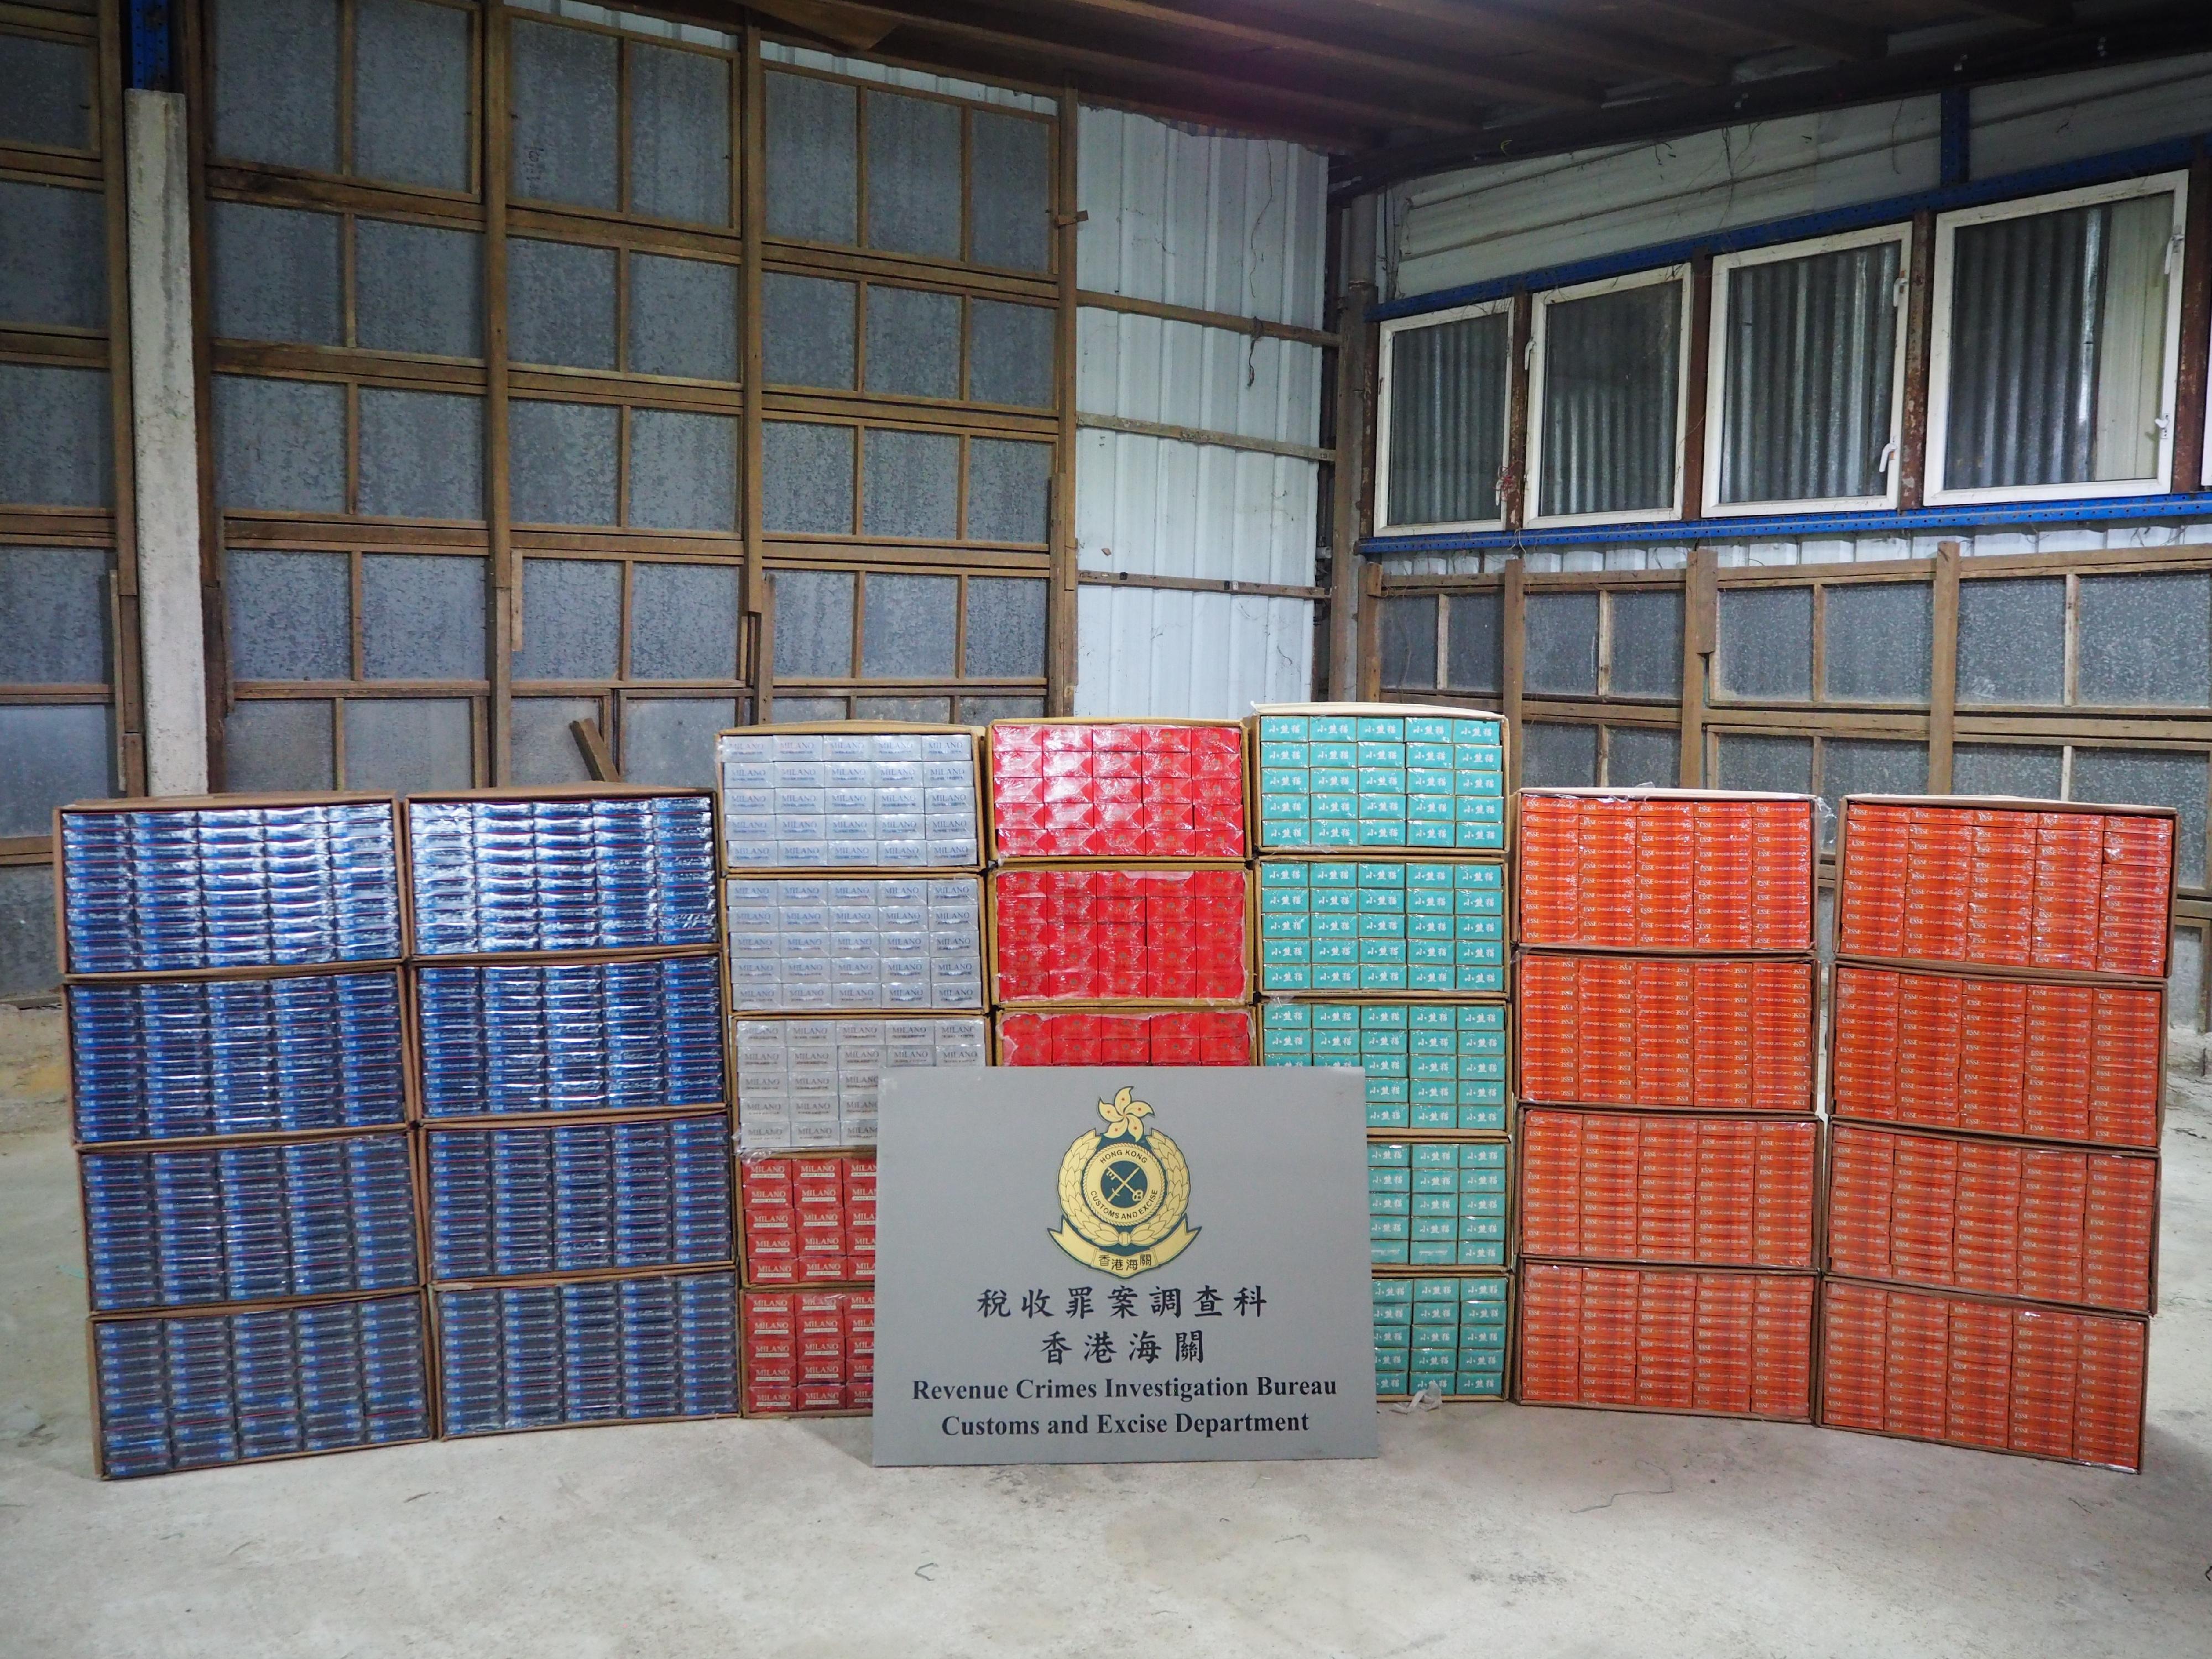 Hong Kong Customs on May 22 raided a suspected illicit cigarette storage centre in Fanling and seized about 1.1 million suspected illicit cigarettes with an estimated market value of about $4.1 million and a duty potential of about $2.8 million. Photo shows some of the suspected illicit cigarettes seized.